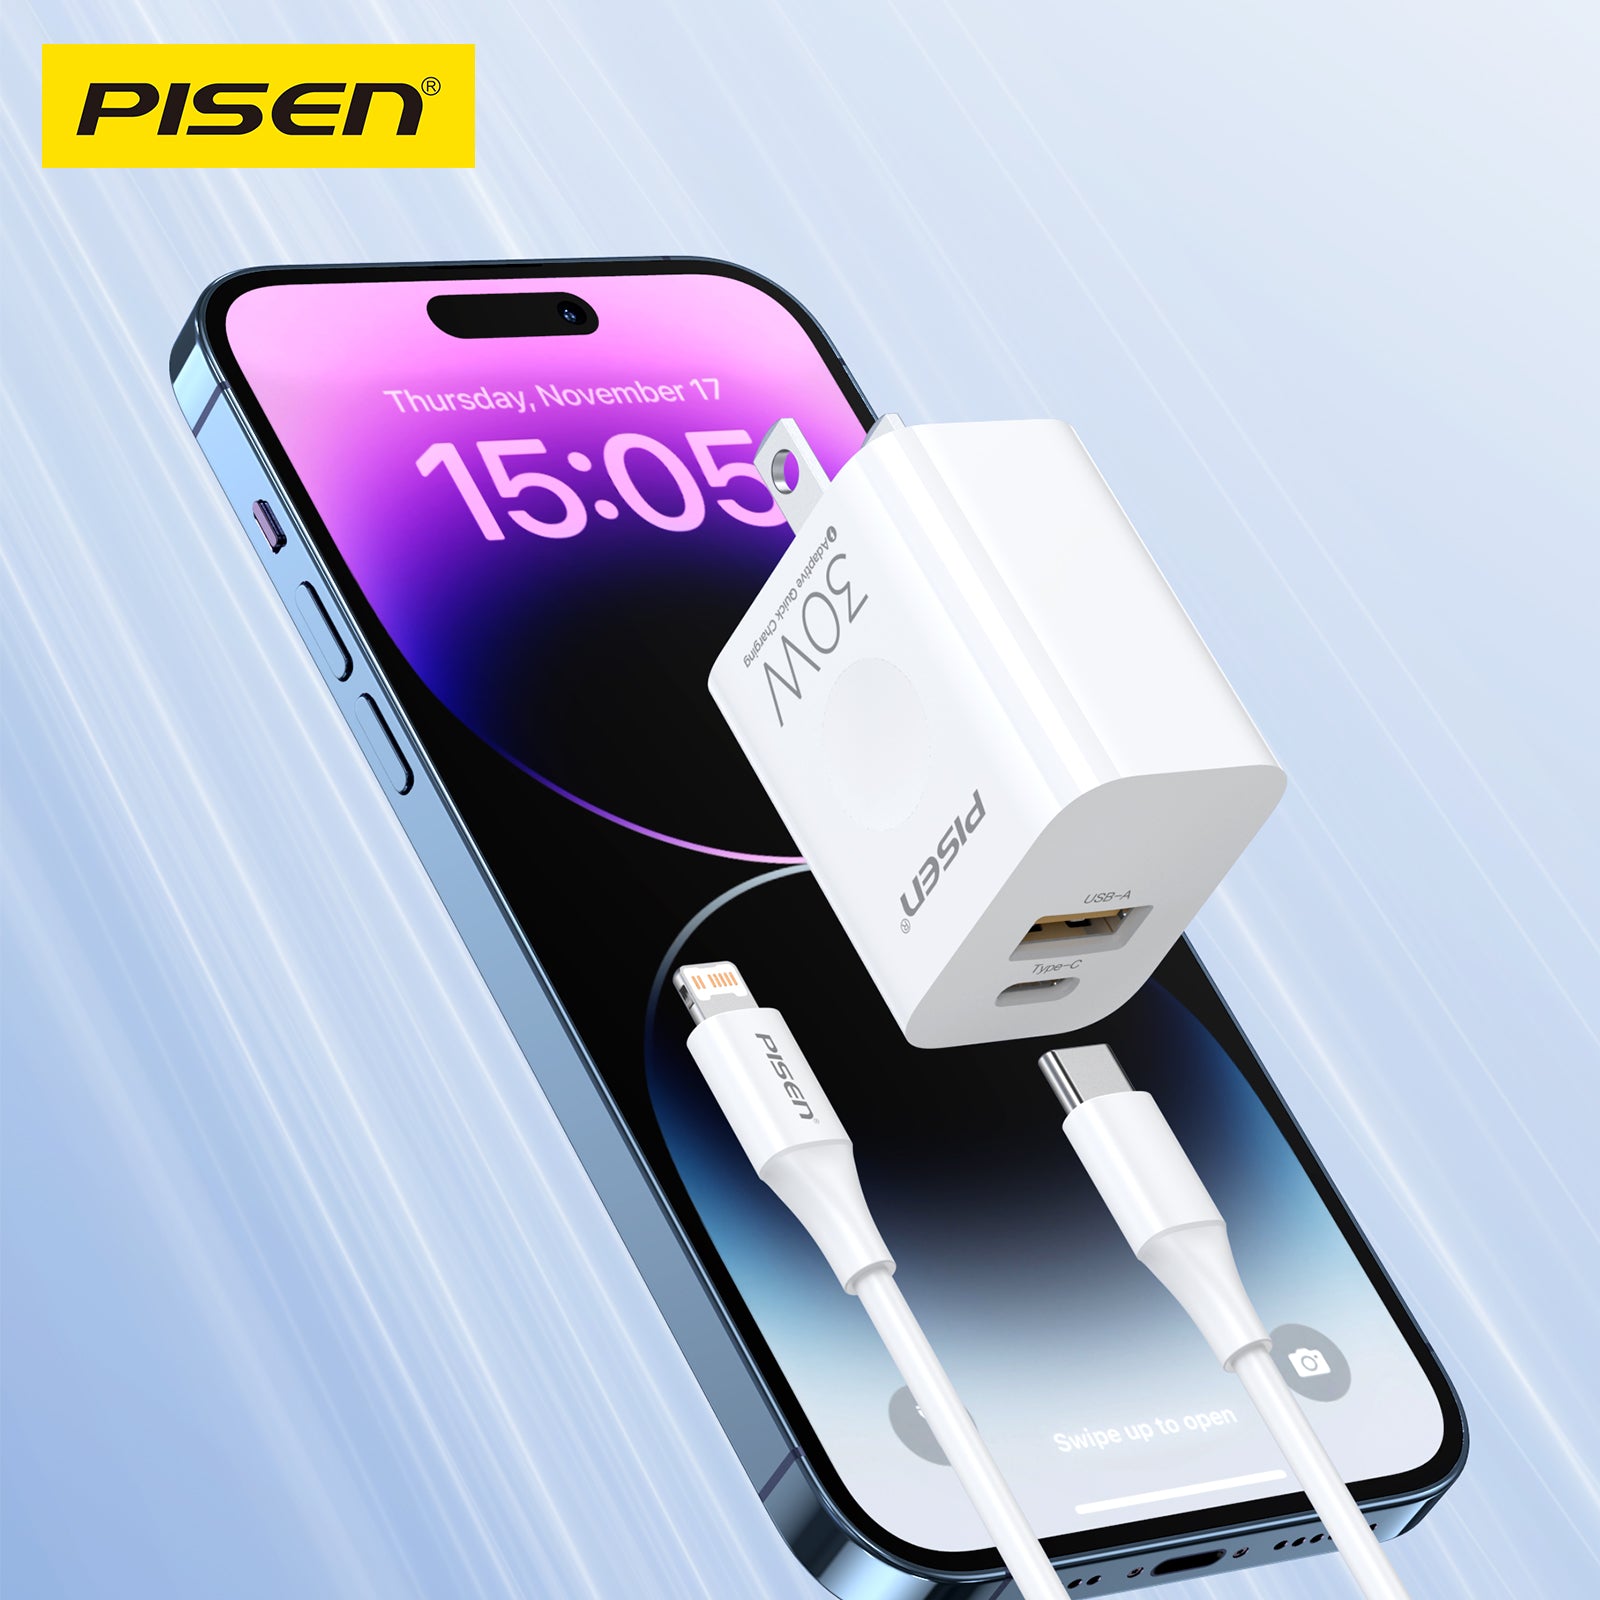 Pisen Quick  USB-C With USB-A  30W Fast Wall Charger (US)